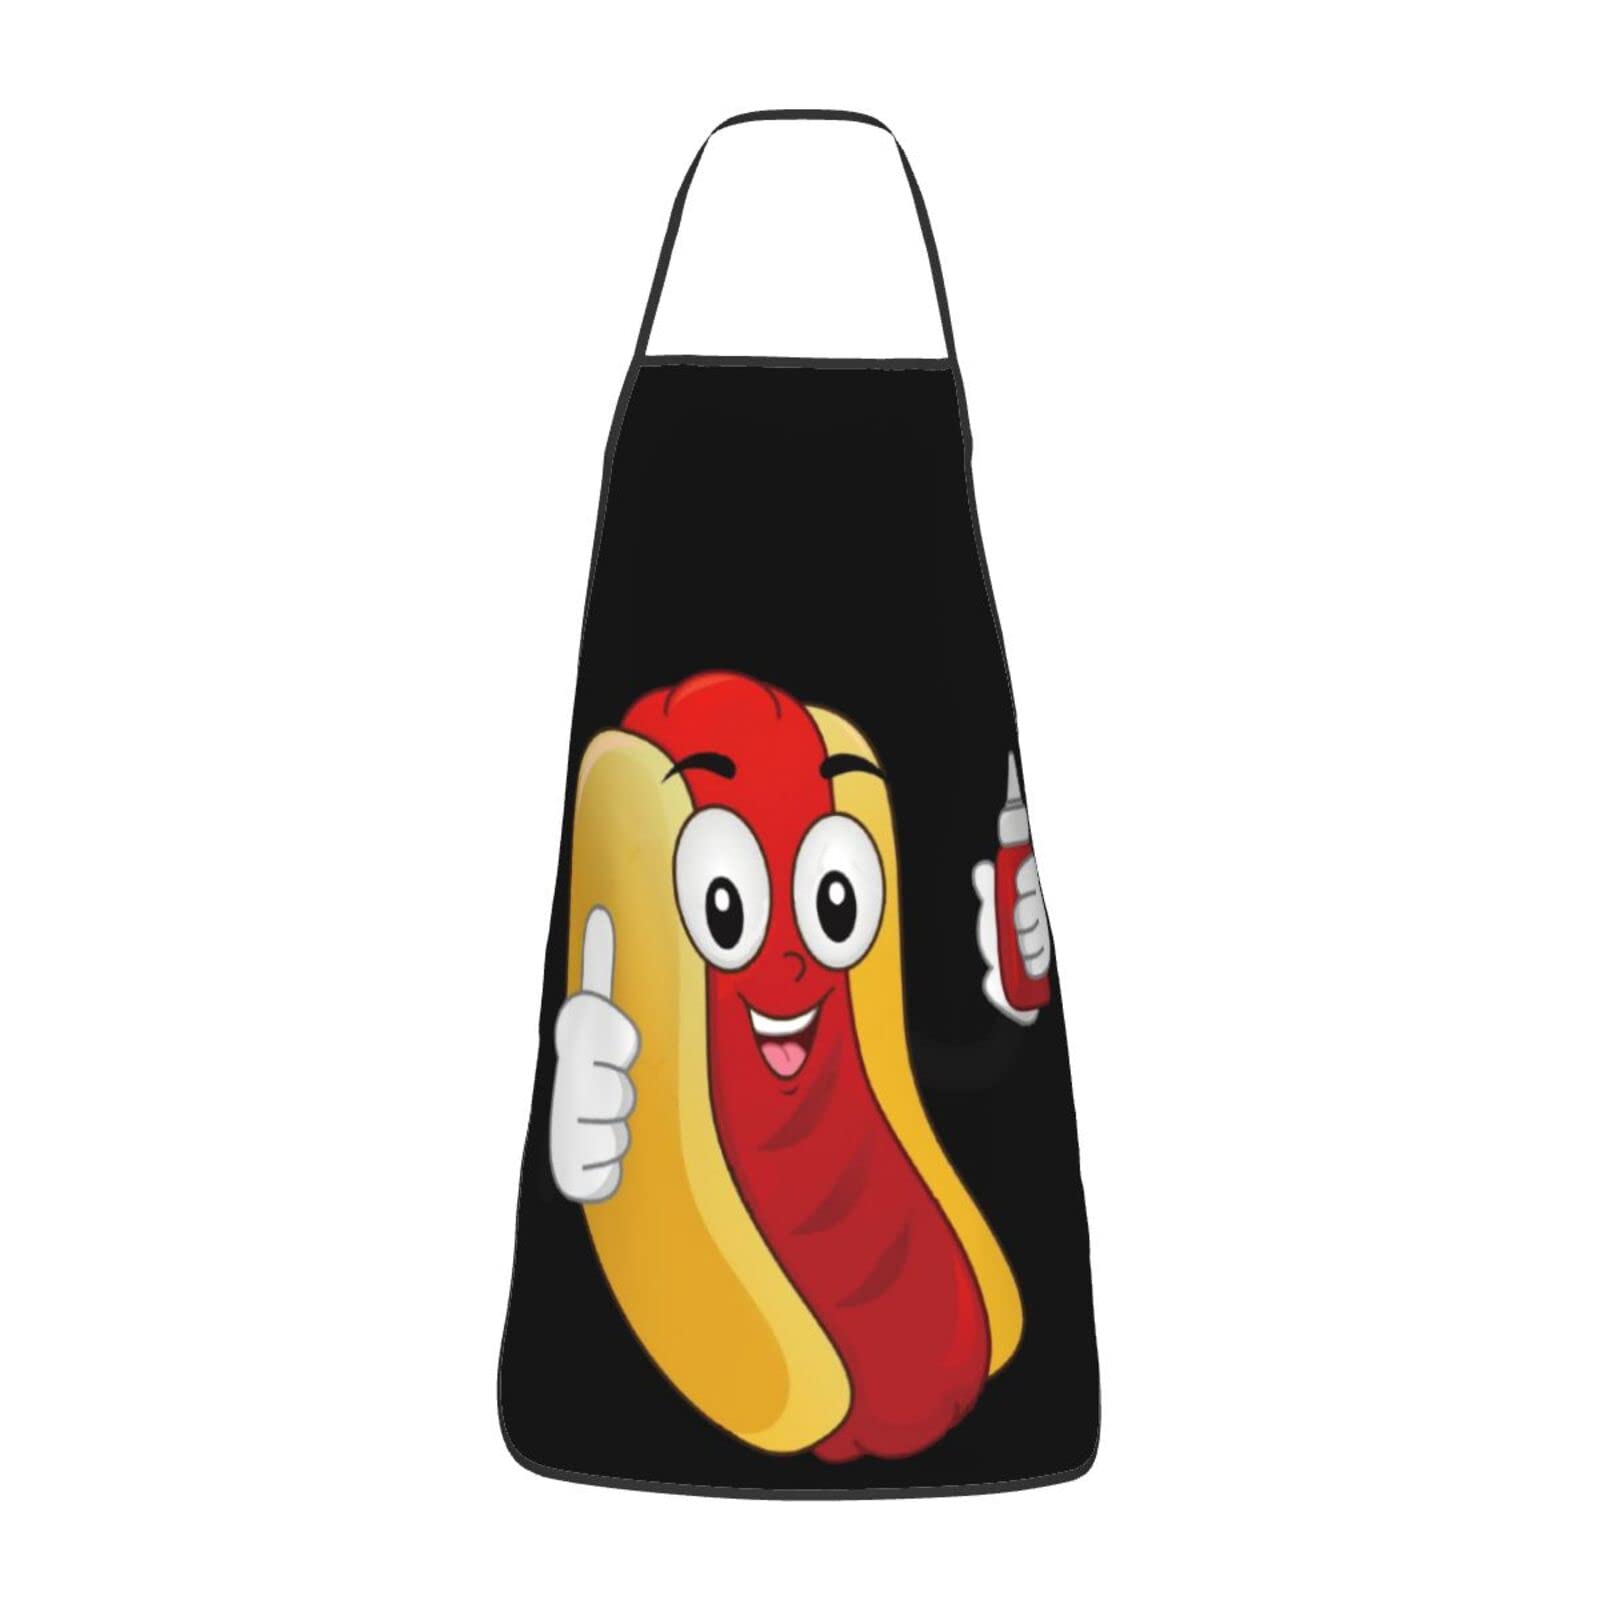 YISHOW Novelty Funny Hotdog Ketchup Unisex Kitchen Chef Apron - Chef Apron For Cooking,Baking,Crafting,Gardening And BBQ